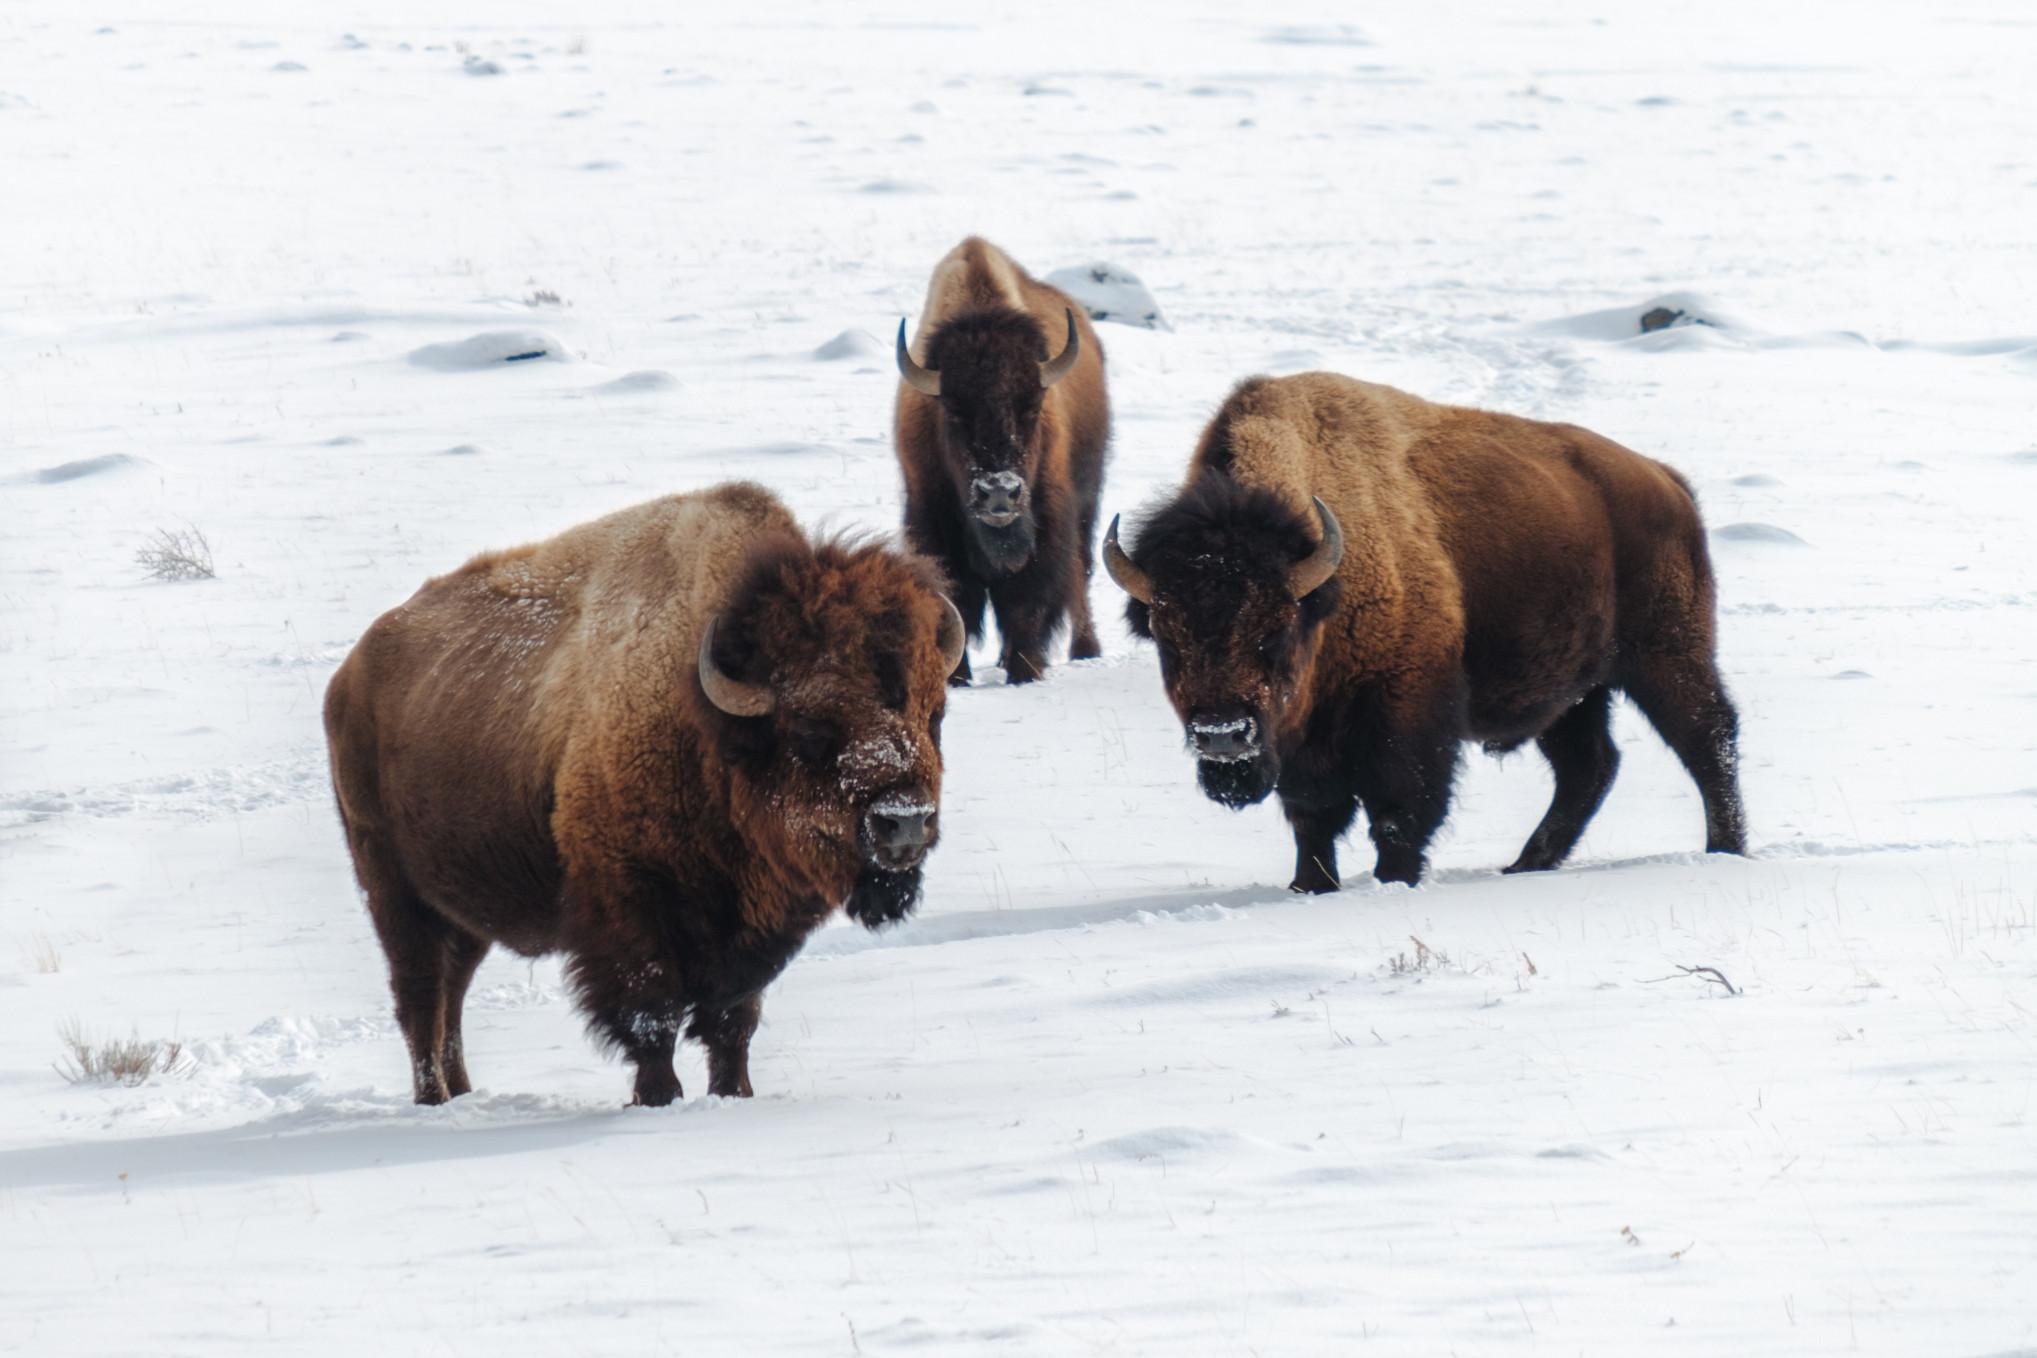 Three Bison in the winter snow at Yellowstone.